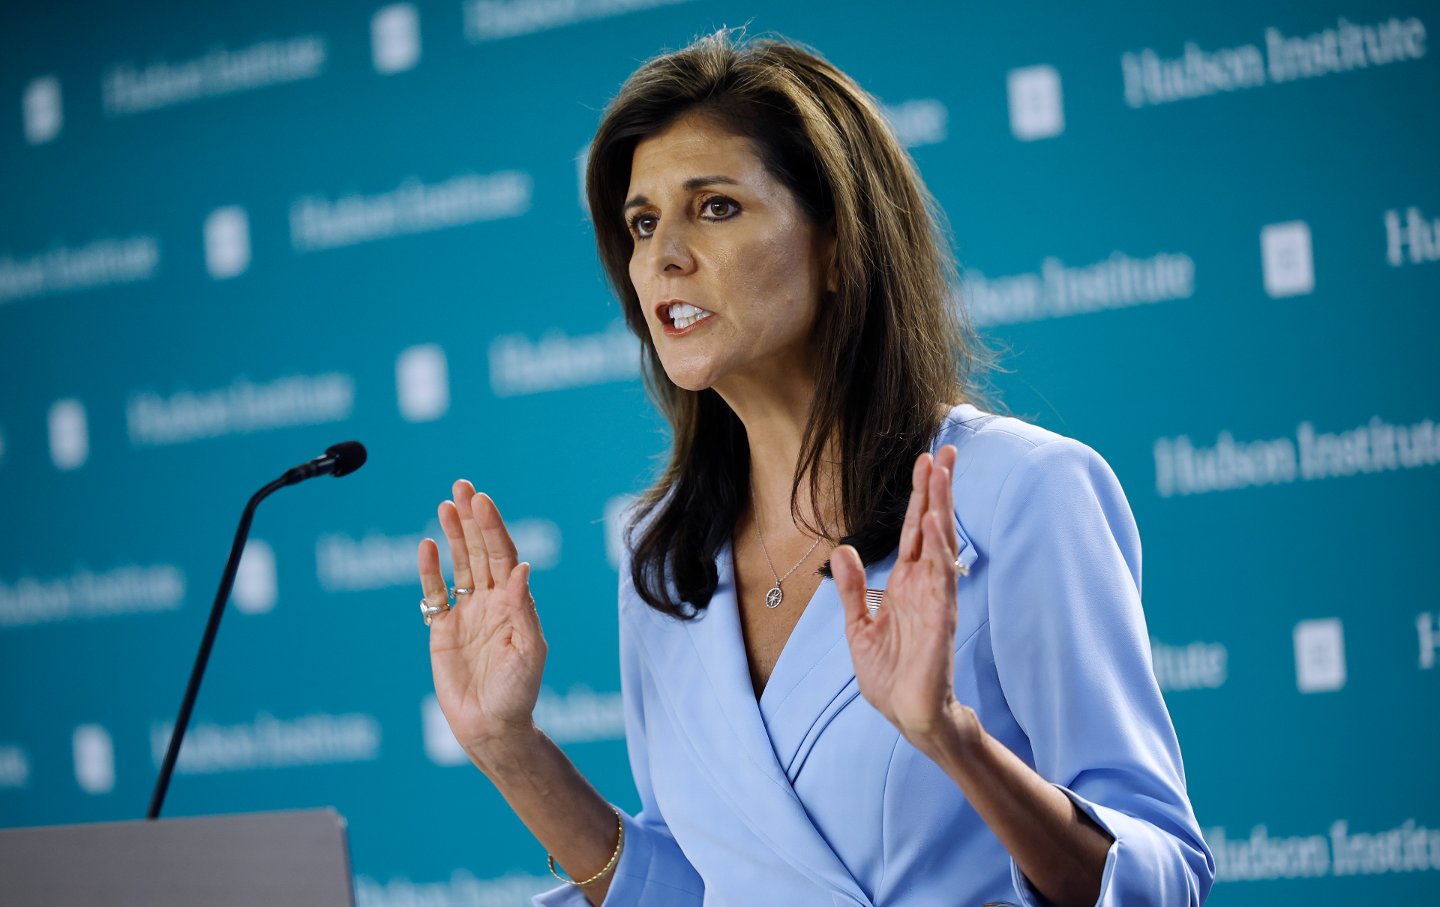 Former UN ambassador Nikki Haley announced that she would vote for former president Donald Trump during an event at the Hudson Institute on May 22, 2024 in Washington, D.C.